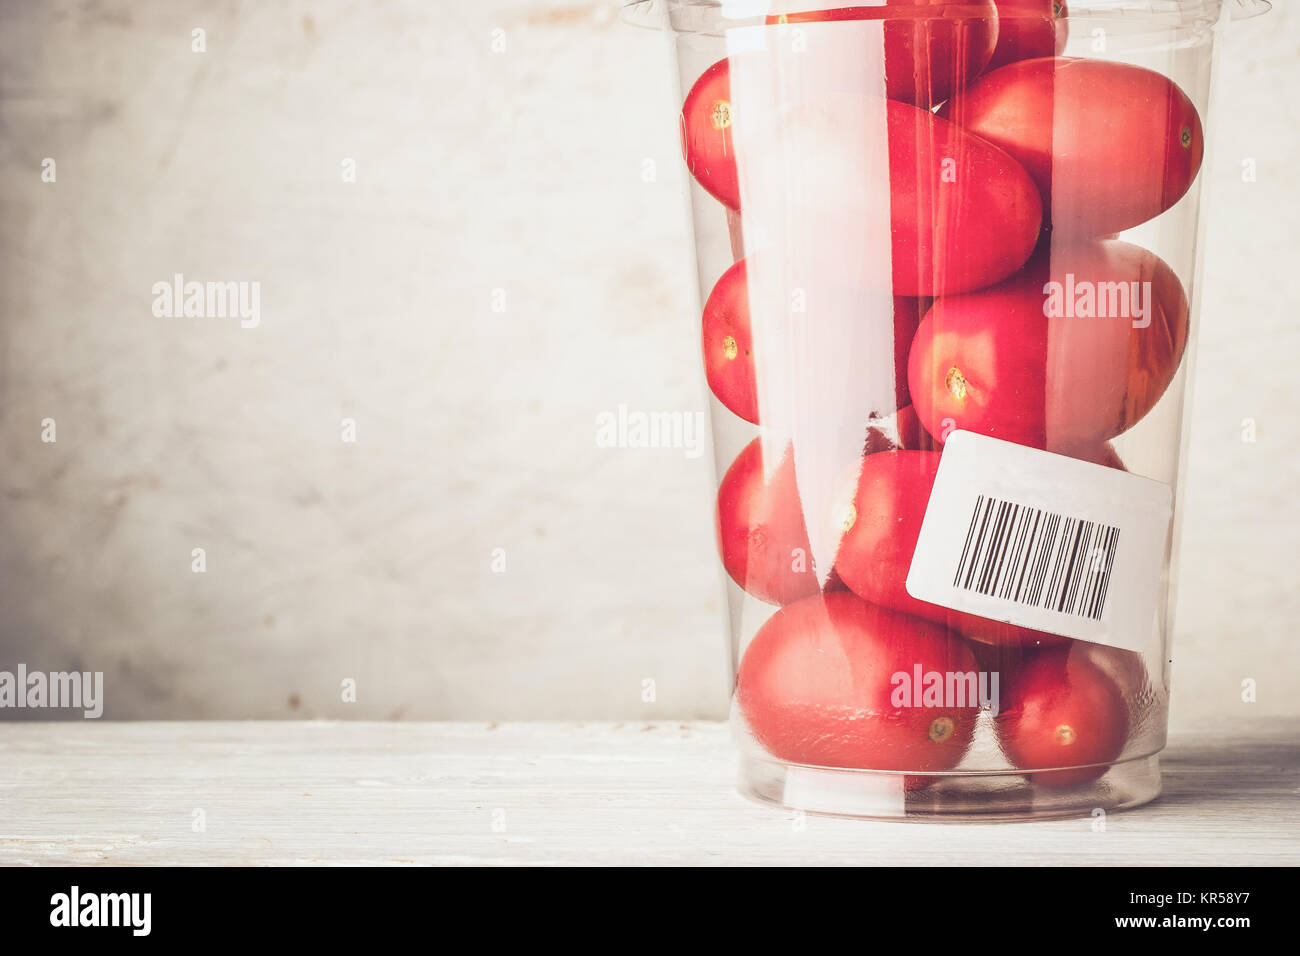 Tomatoes in the plastic container close-up Stock Photo